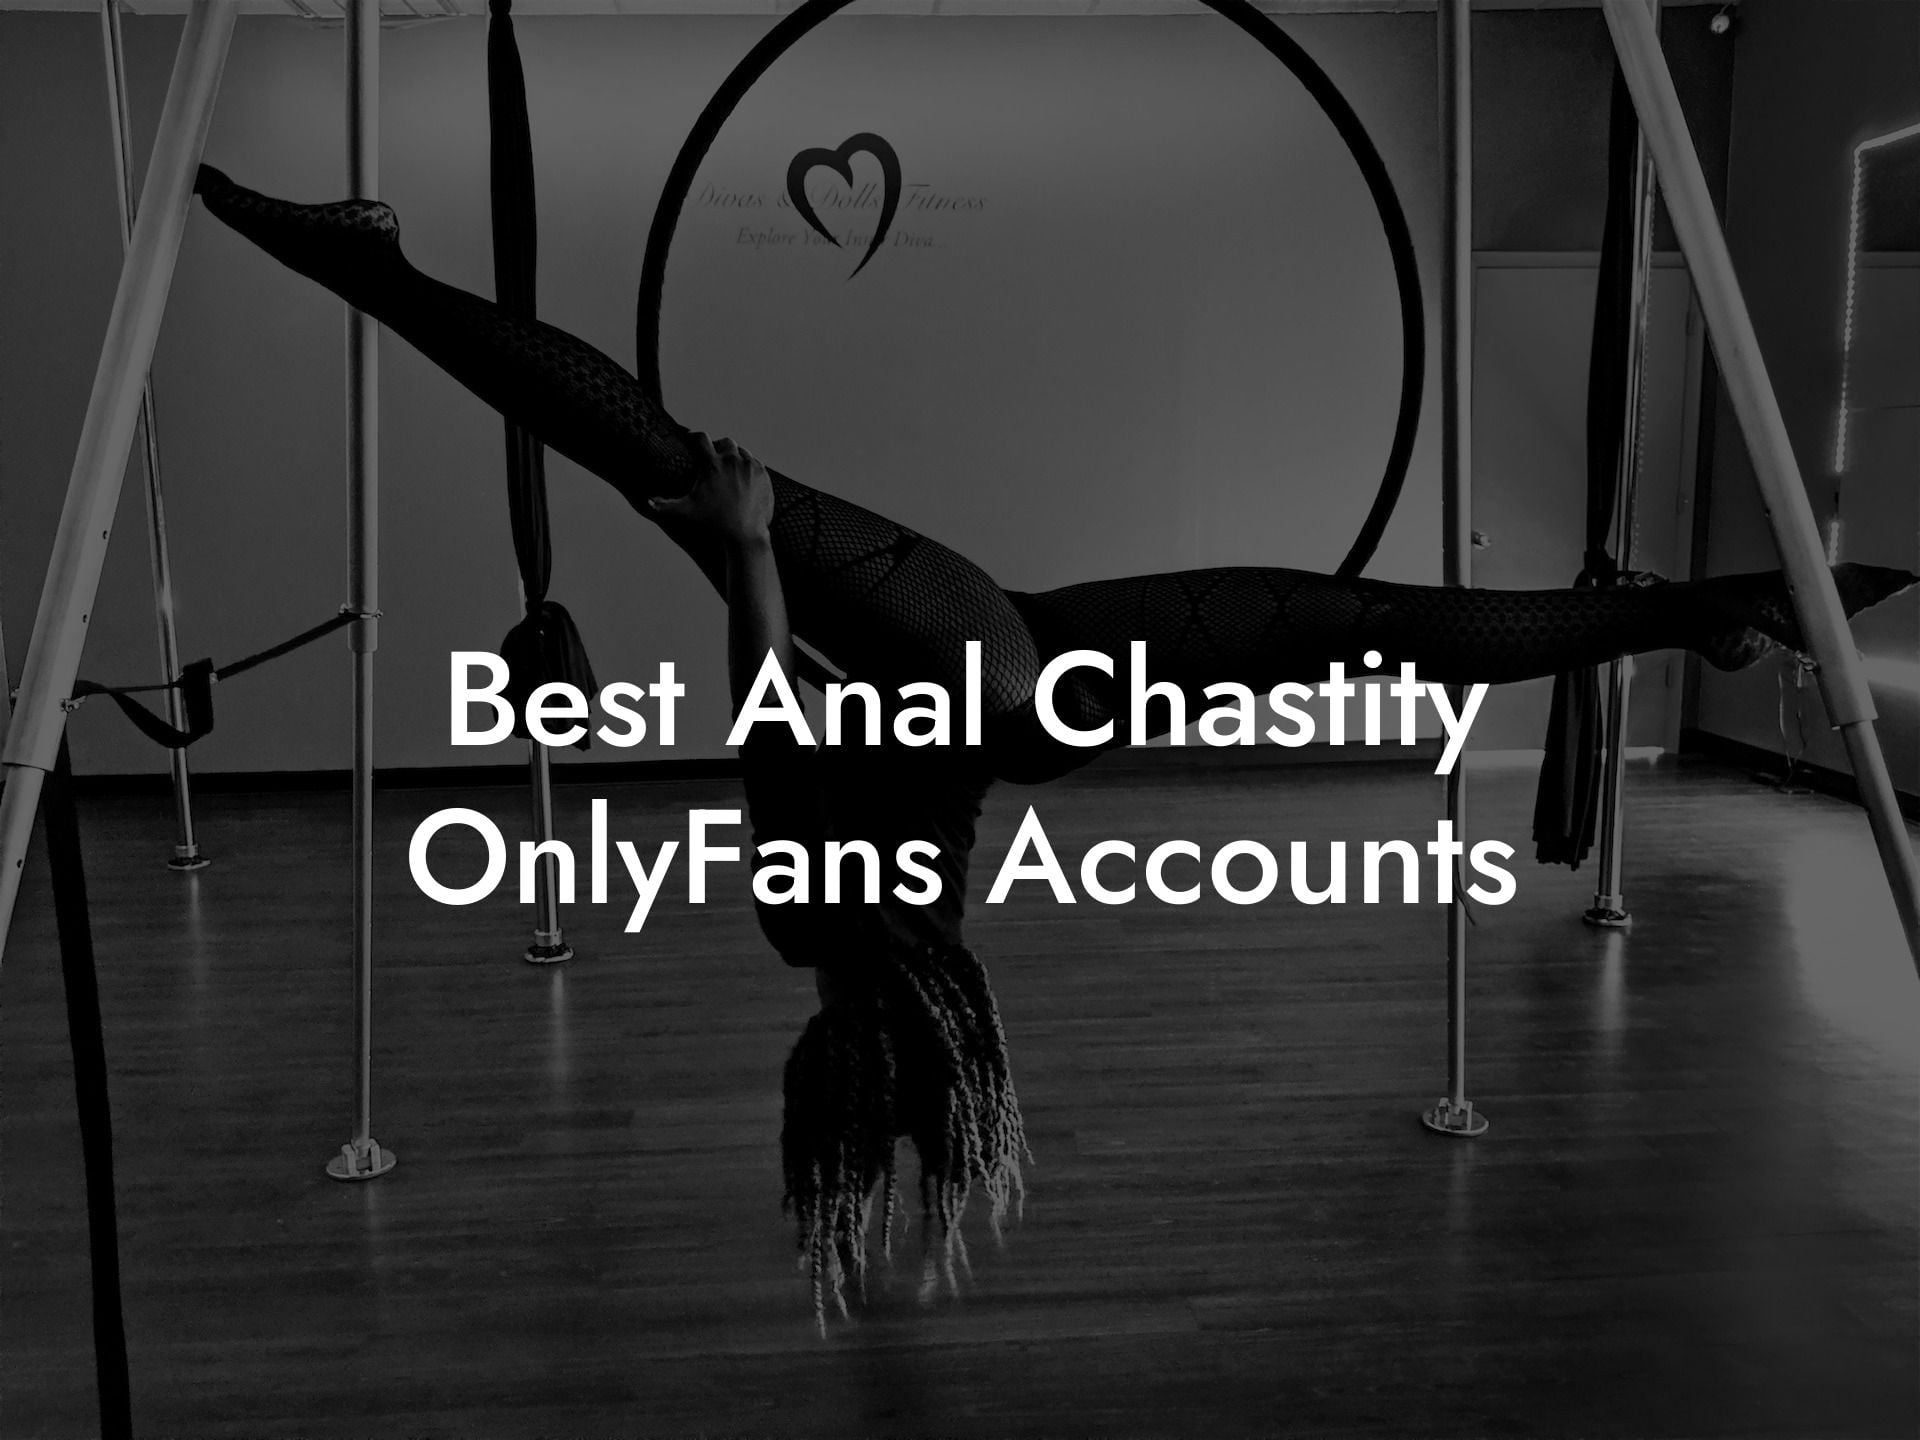 Best Anal Chastity OnlyFans Accounts